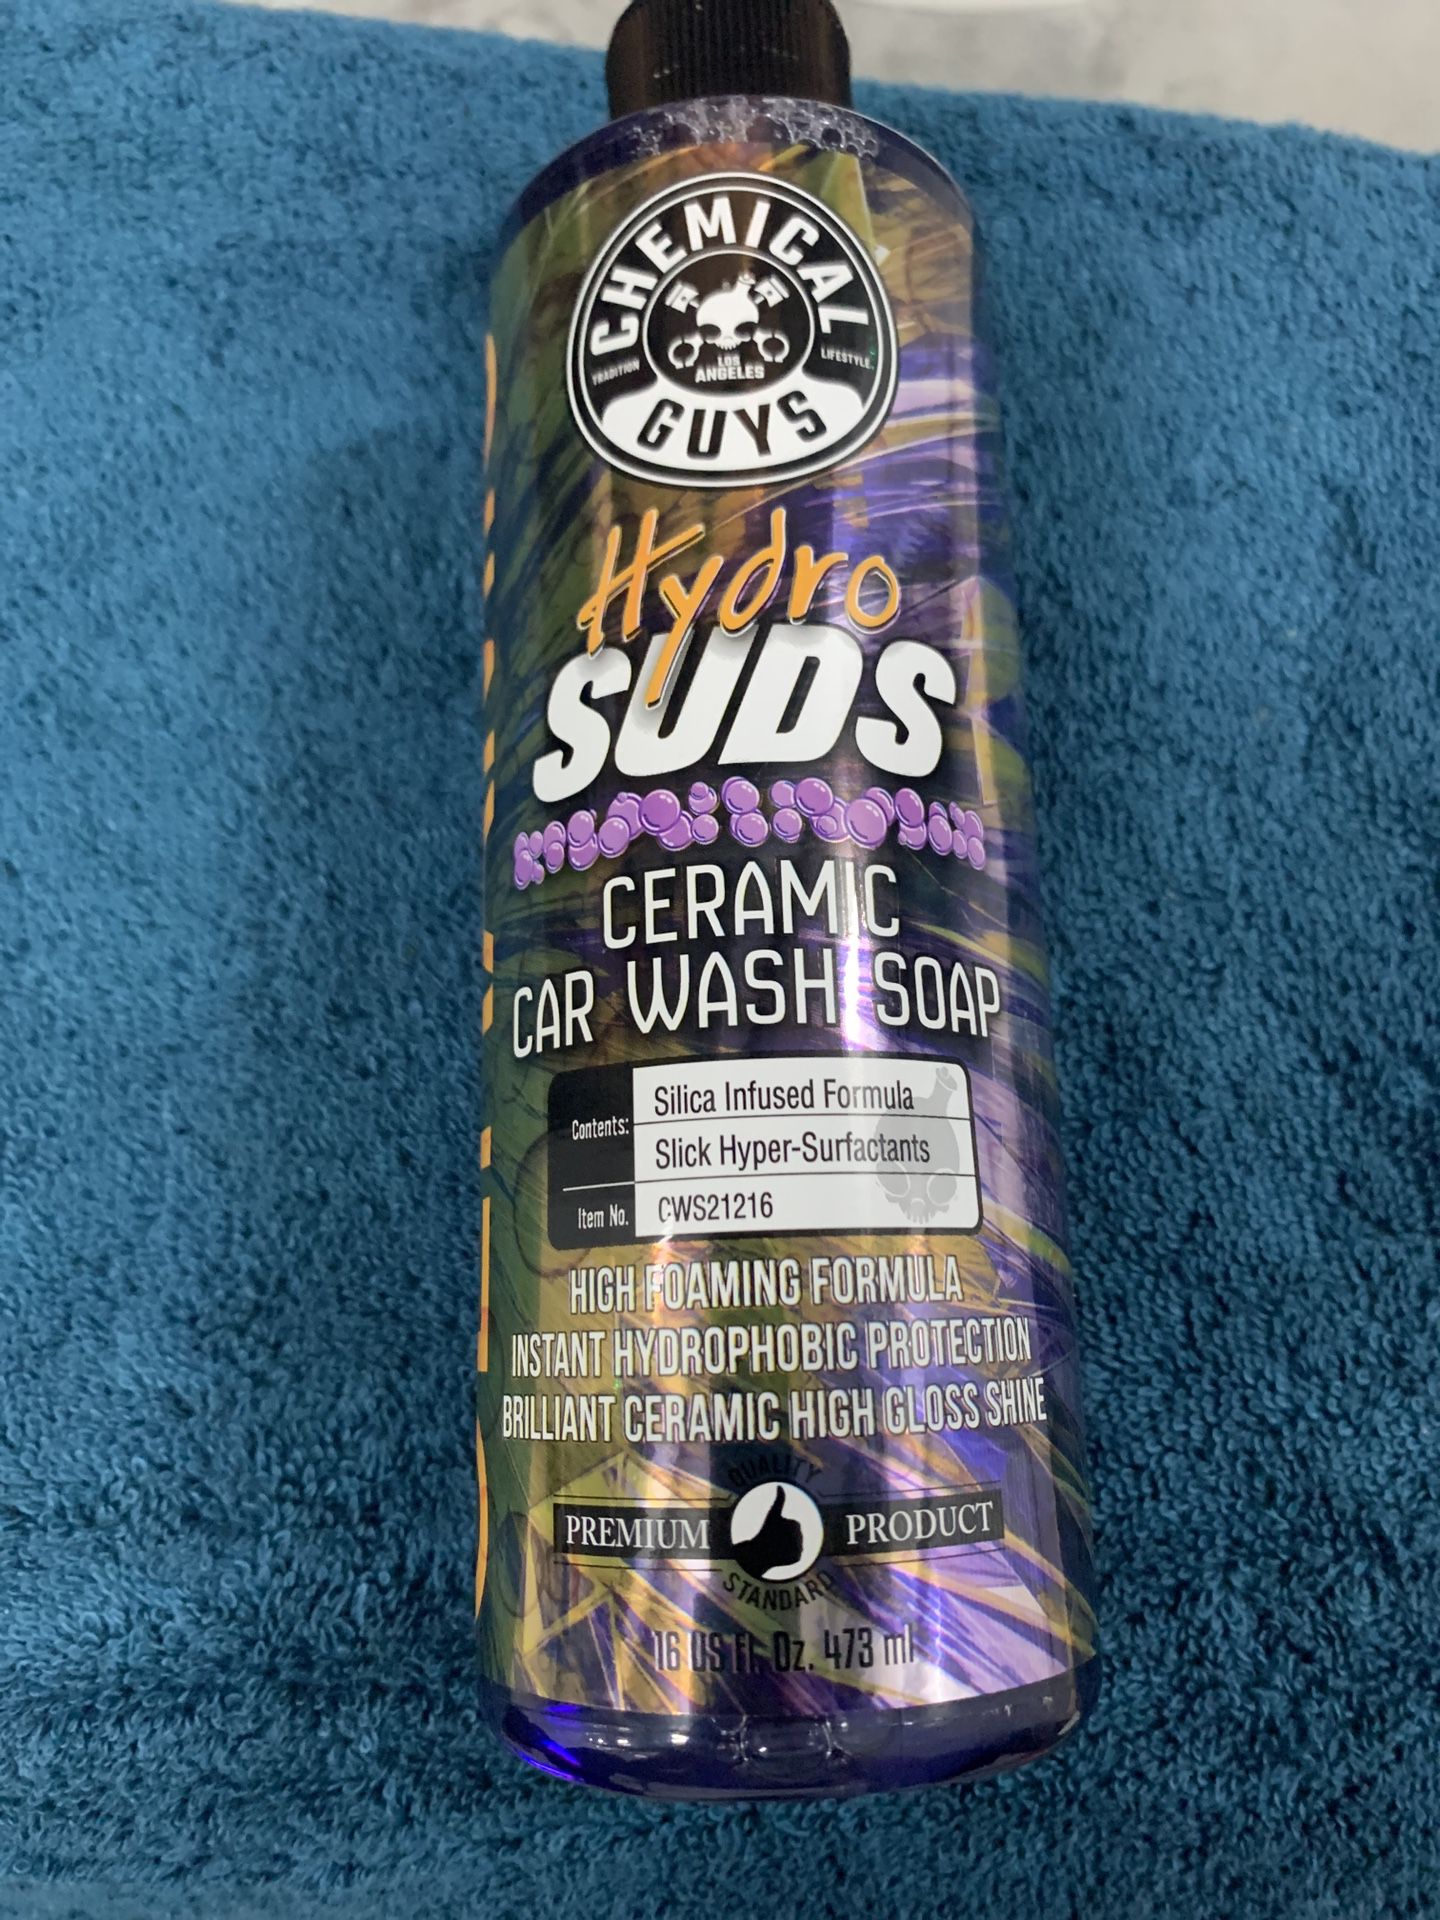 Brand new and available chemical guys hydro suds car wash